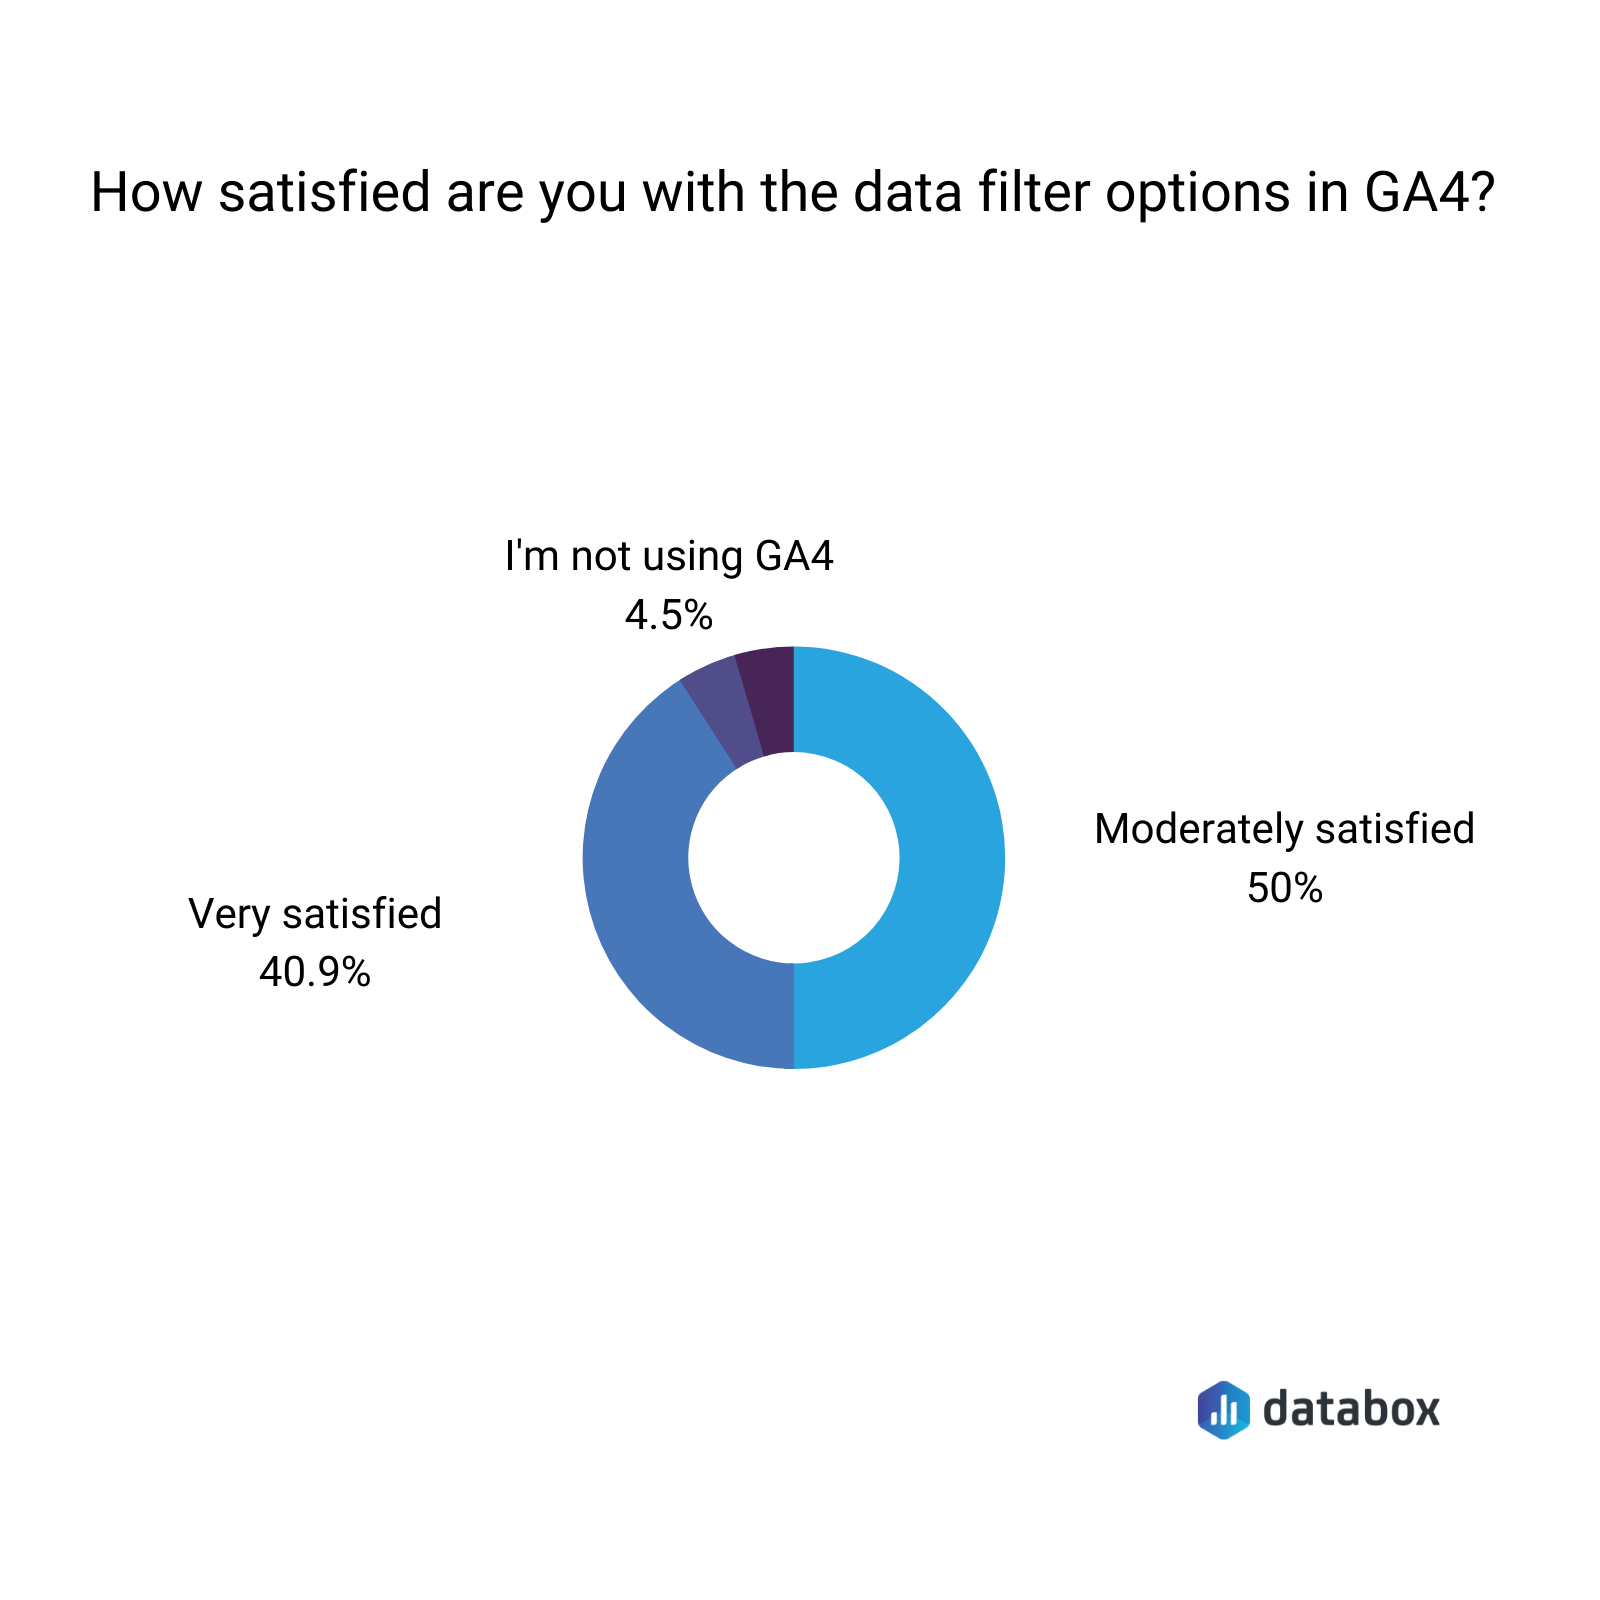 how satisfied are you with data filter options in GA4